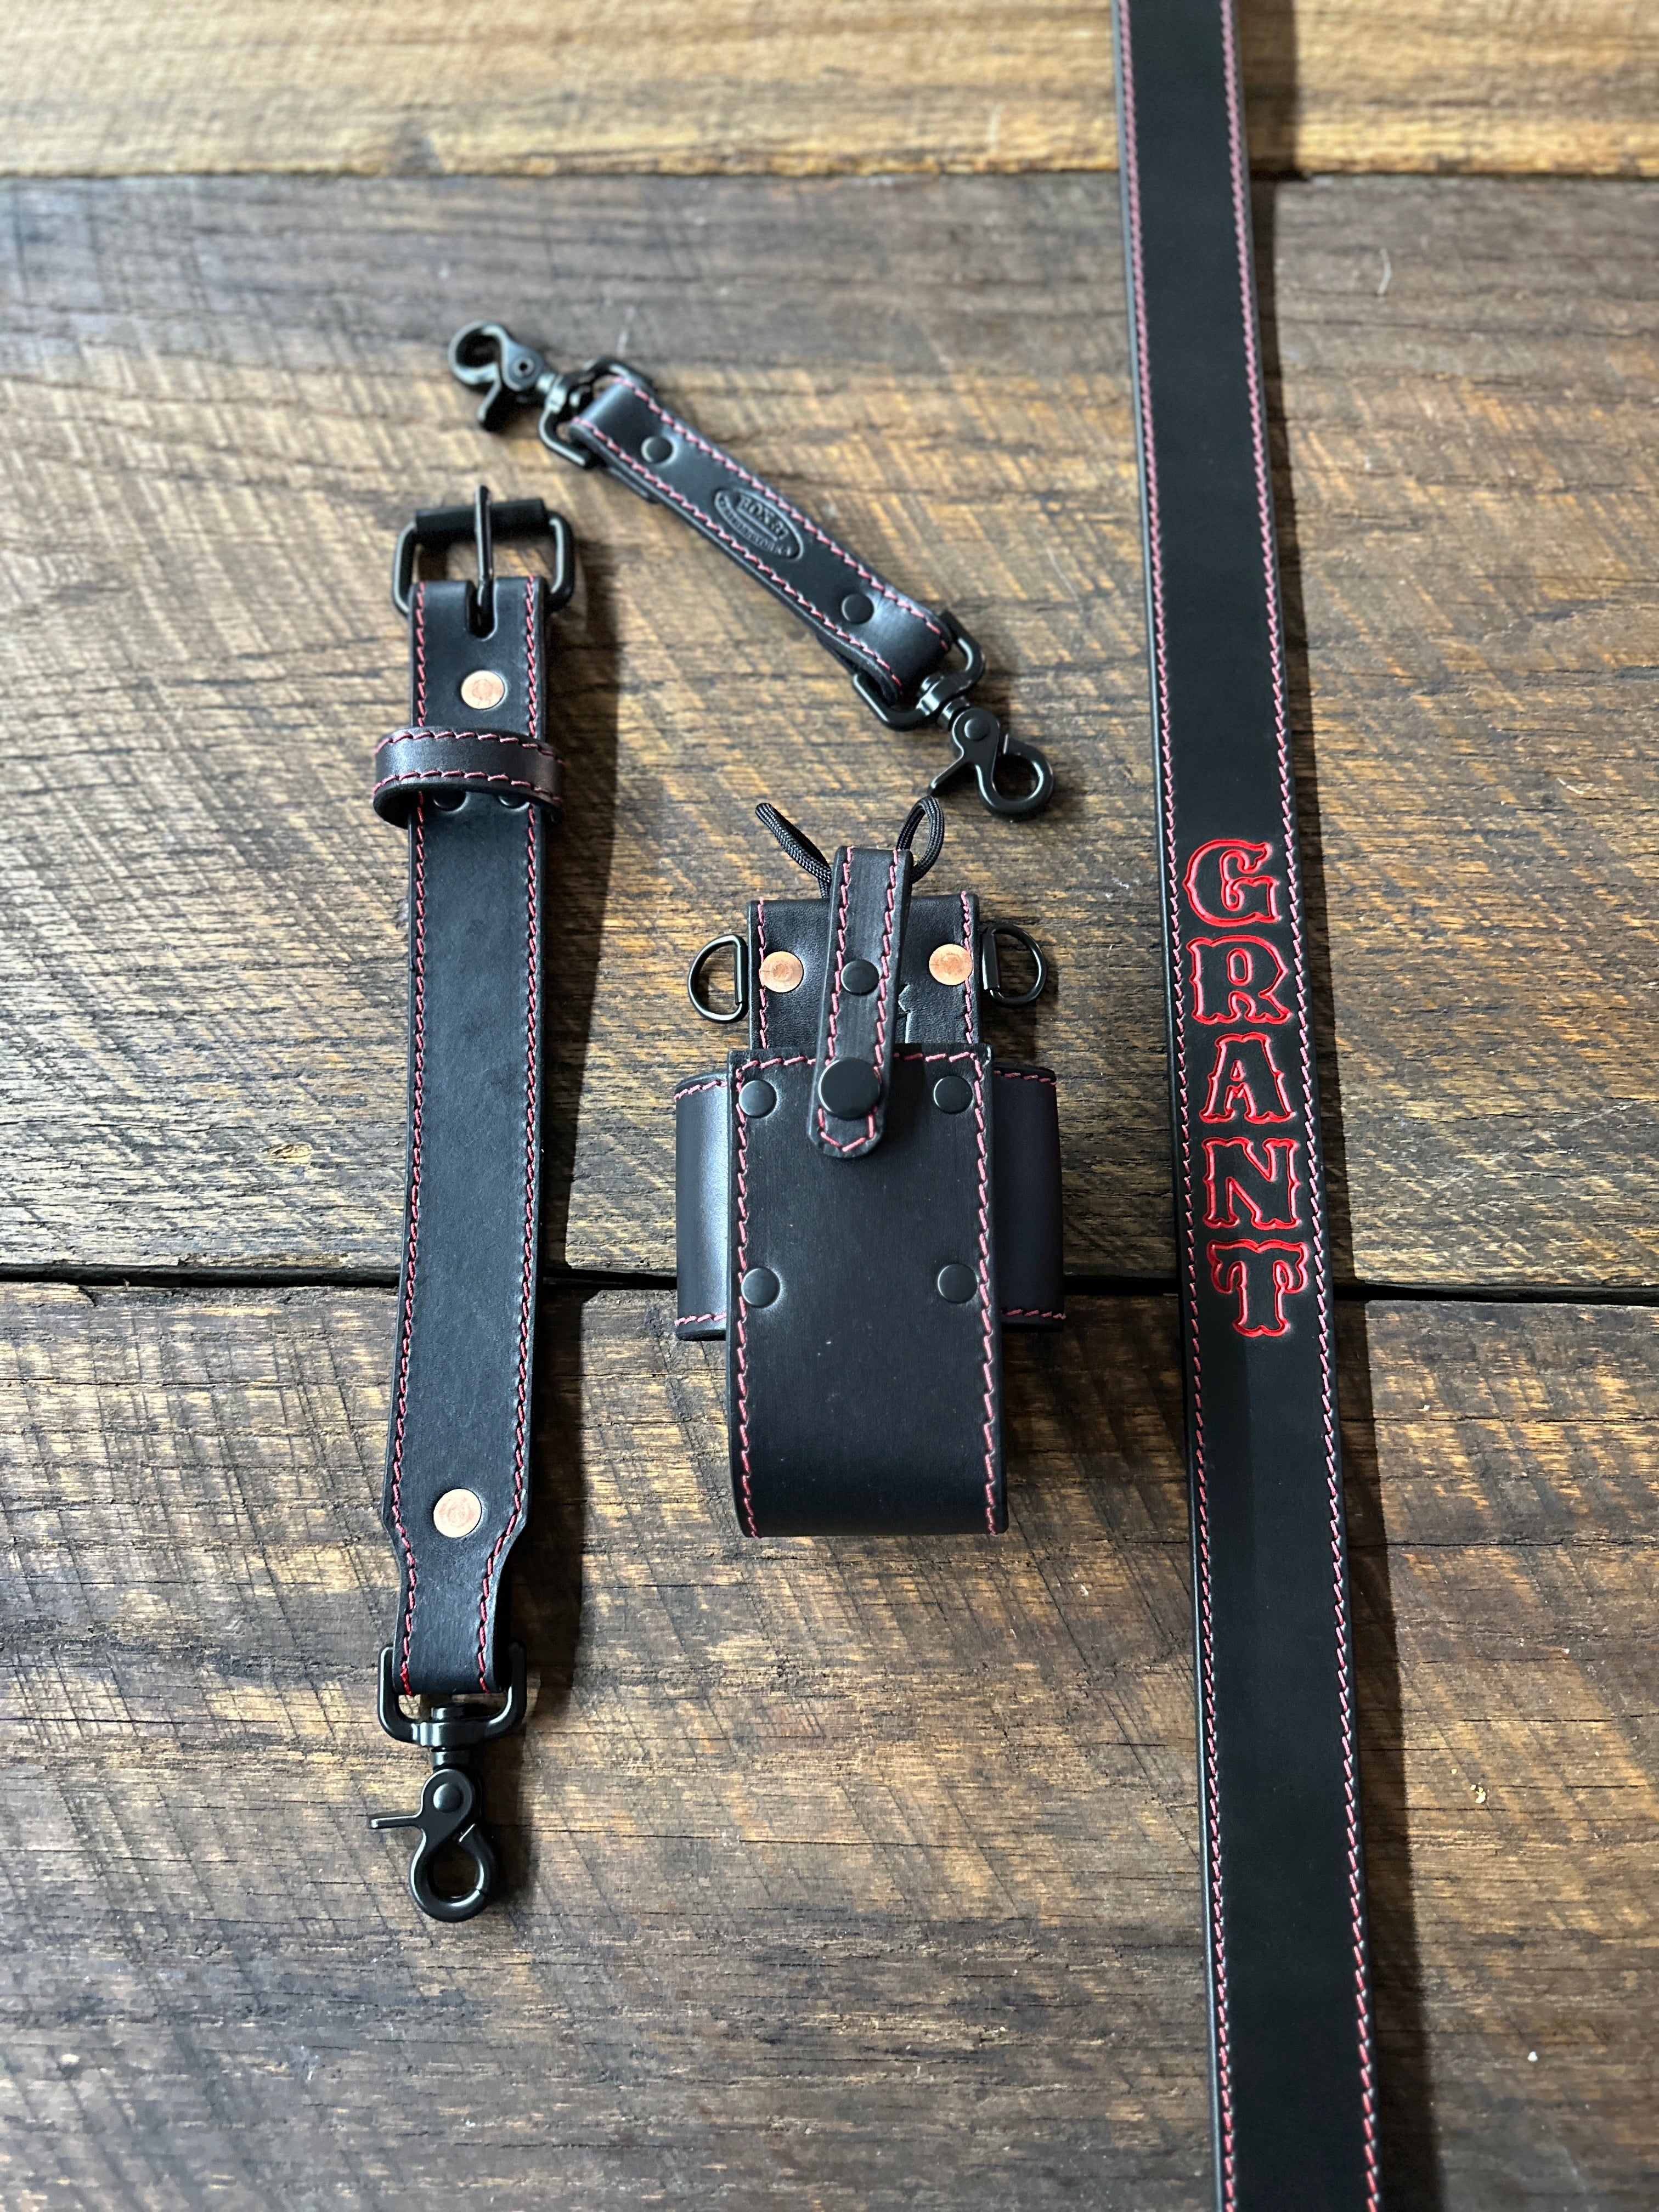 The "Quick Strap" Leather Radio Strap - $140 Shipped For Free In 1 Week